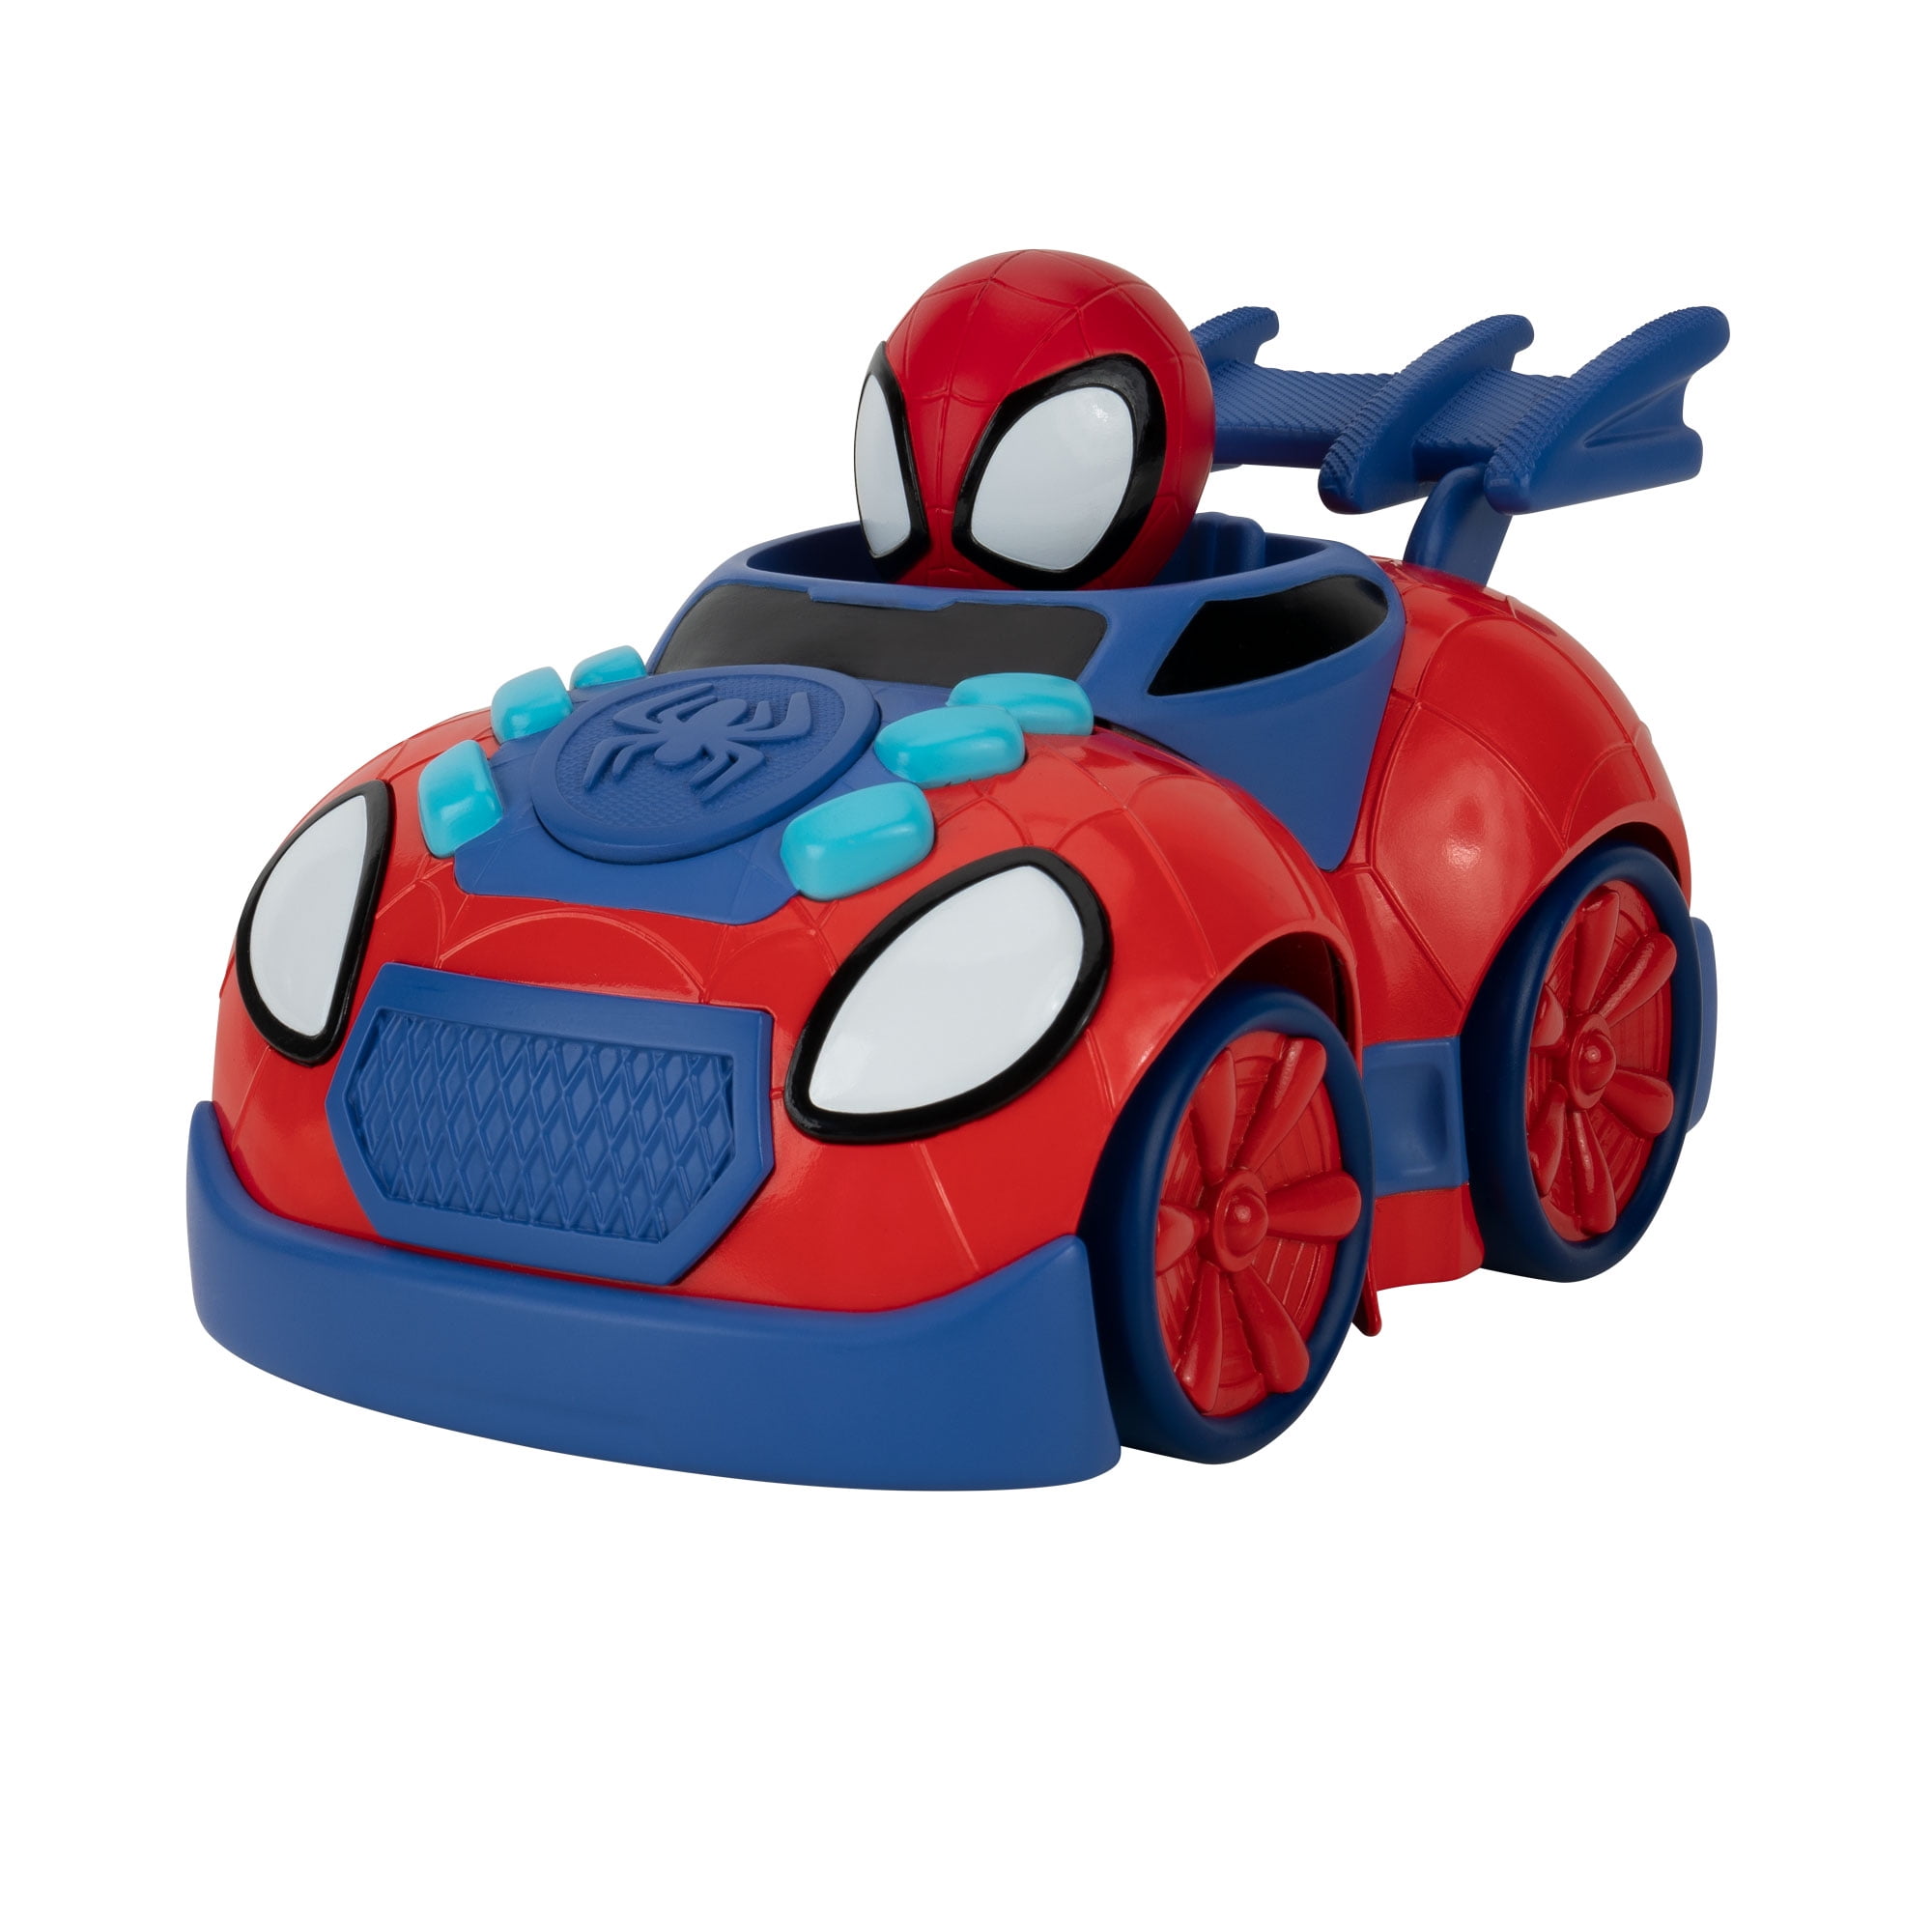 Marvel Super Hero Adventures Spider Man Buggy With 6 Way Remote Control for sale online 